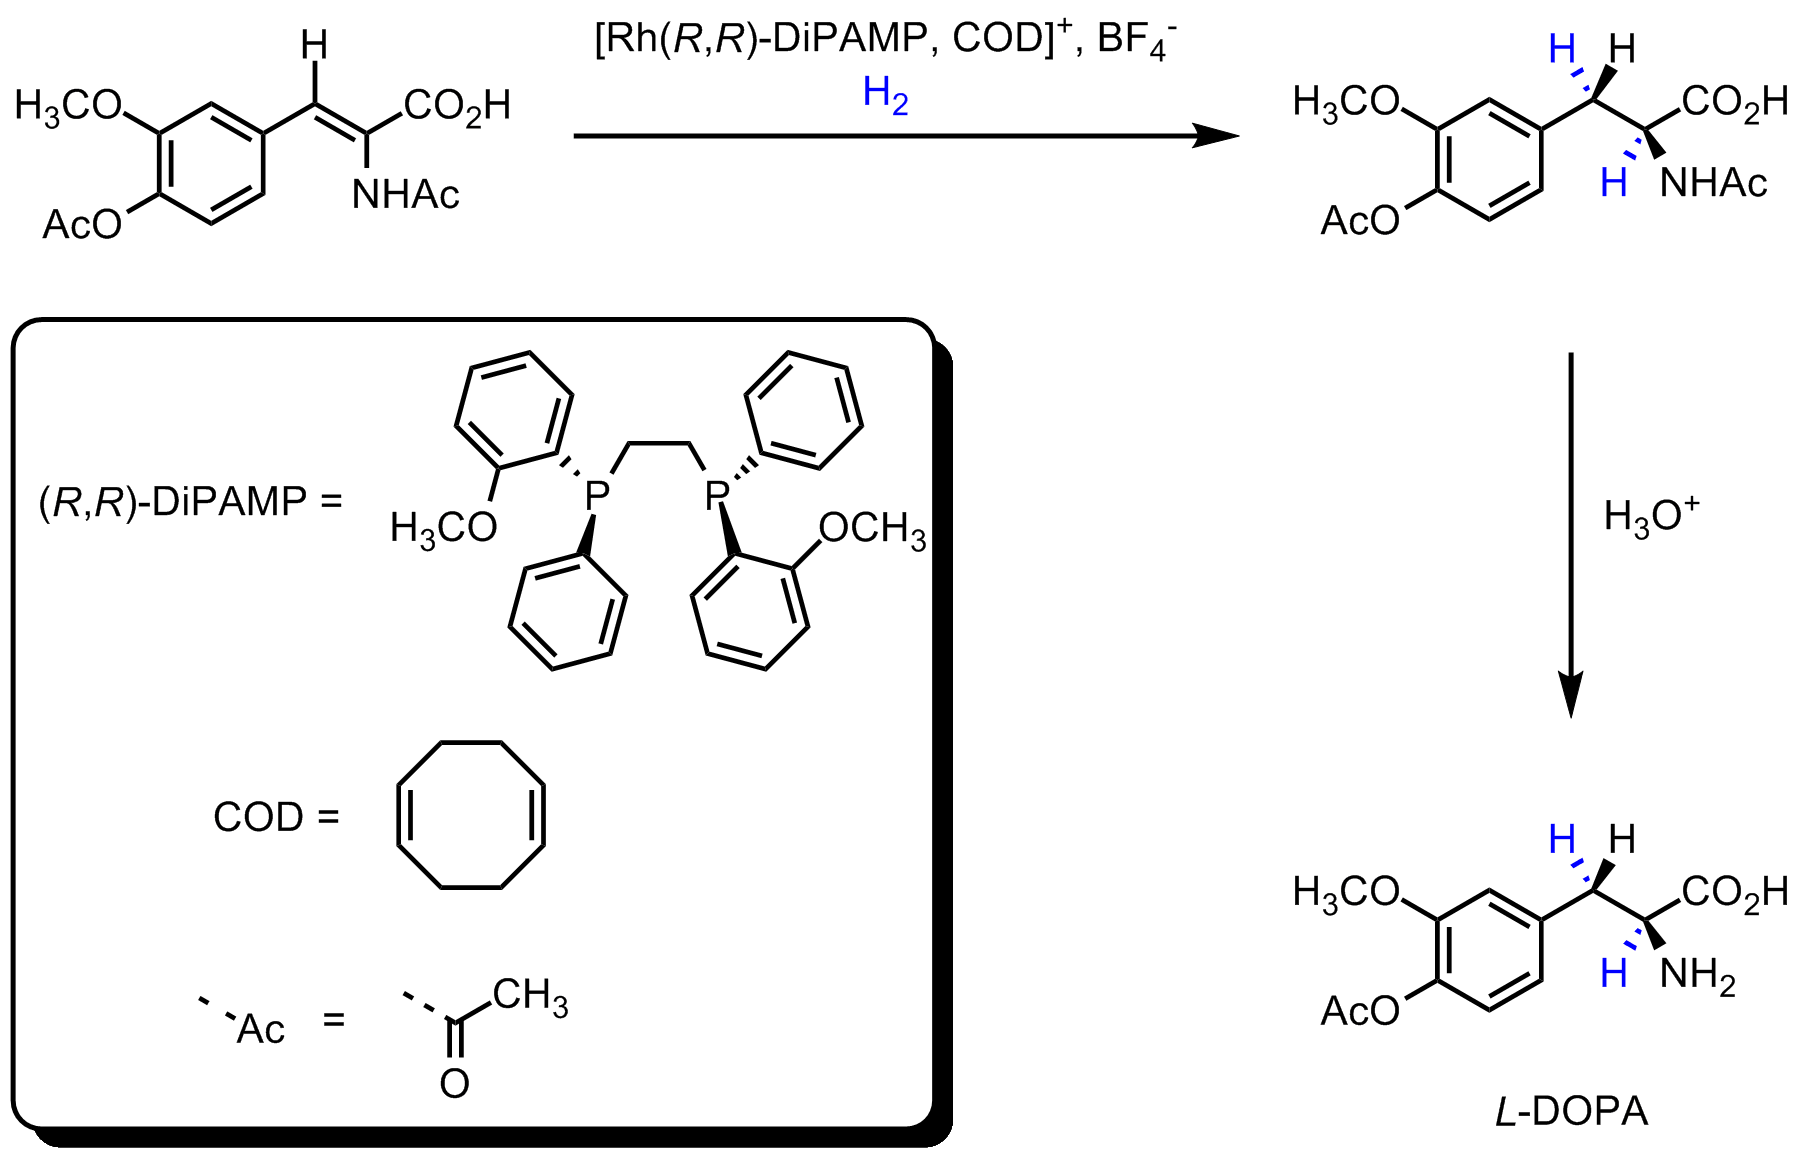 L-DOPA synthesis